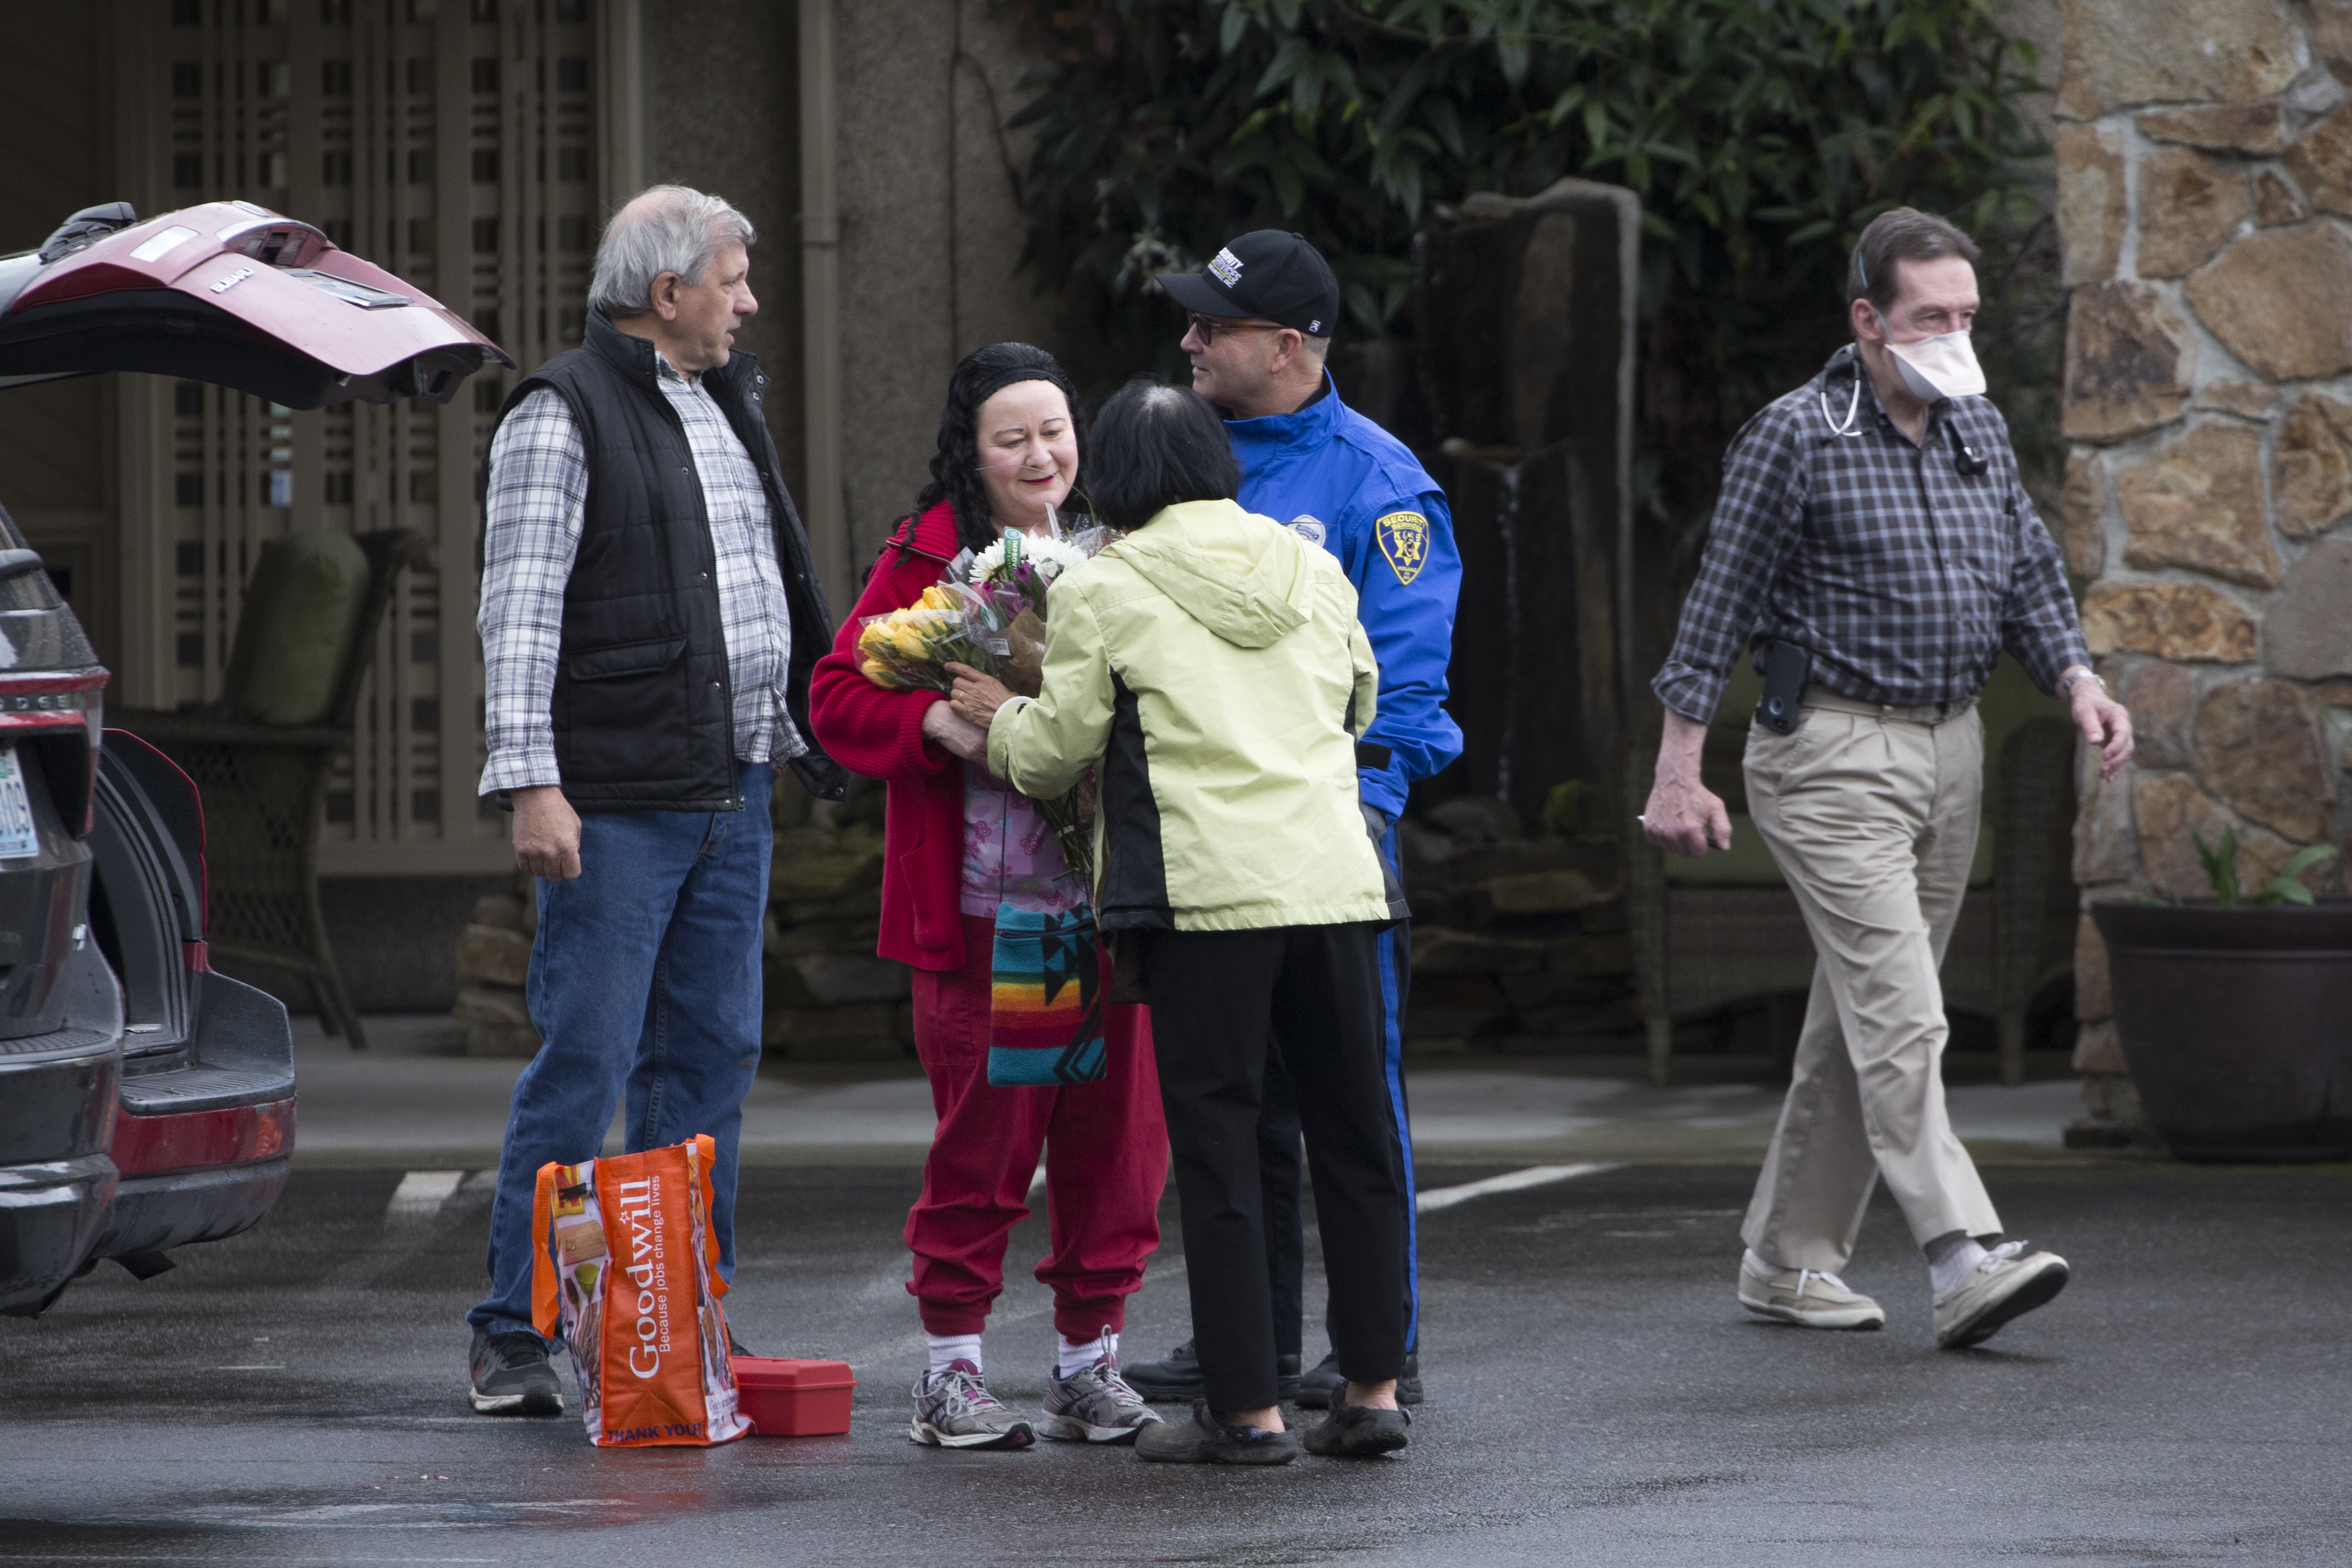 Su Wilson hands flowers to a staff member (in red uniform) to give to her mother, Chun Liu, who is a patient at the Life Care Center nursing home in Kirkland, Washington, on March 6, 2020. (Karen Ducey—Getty Images)